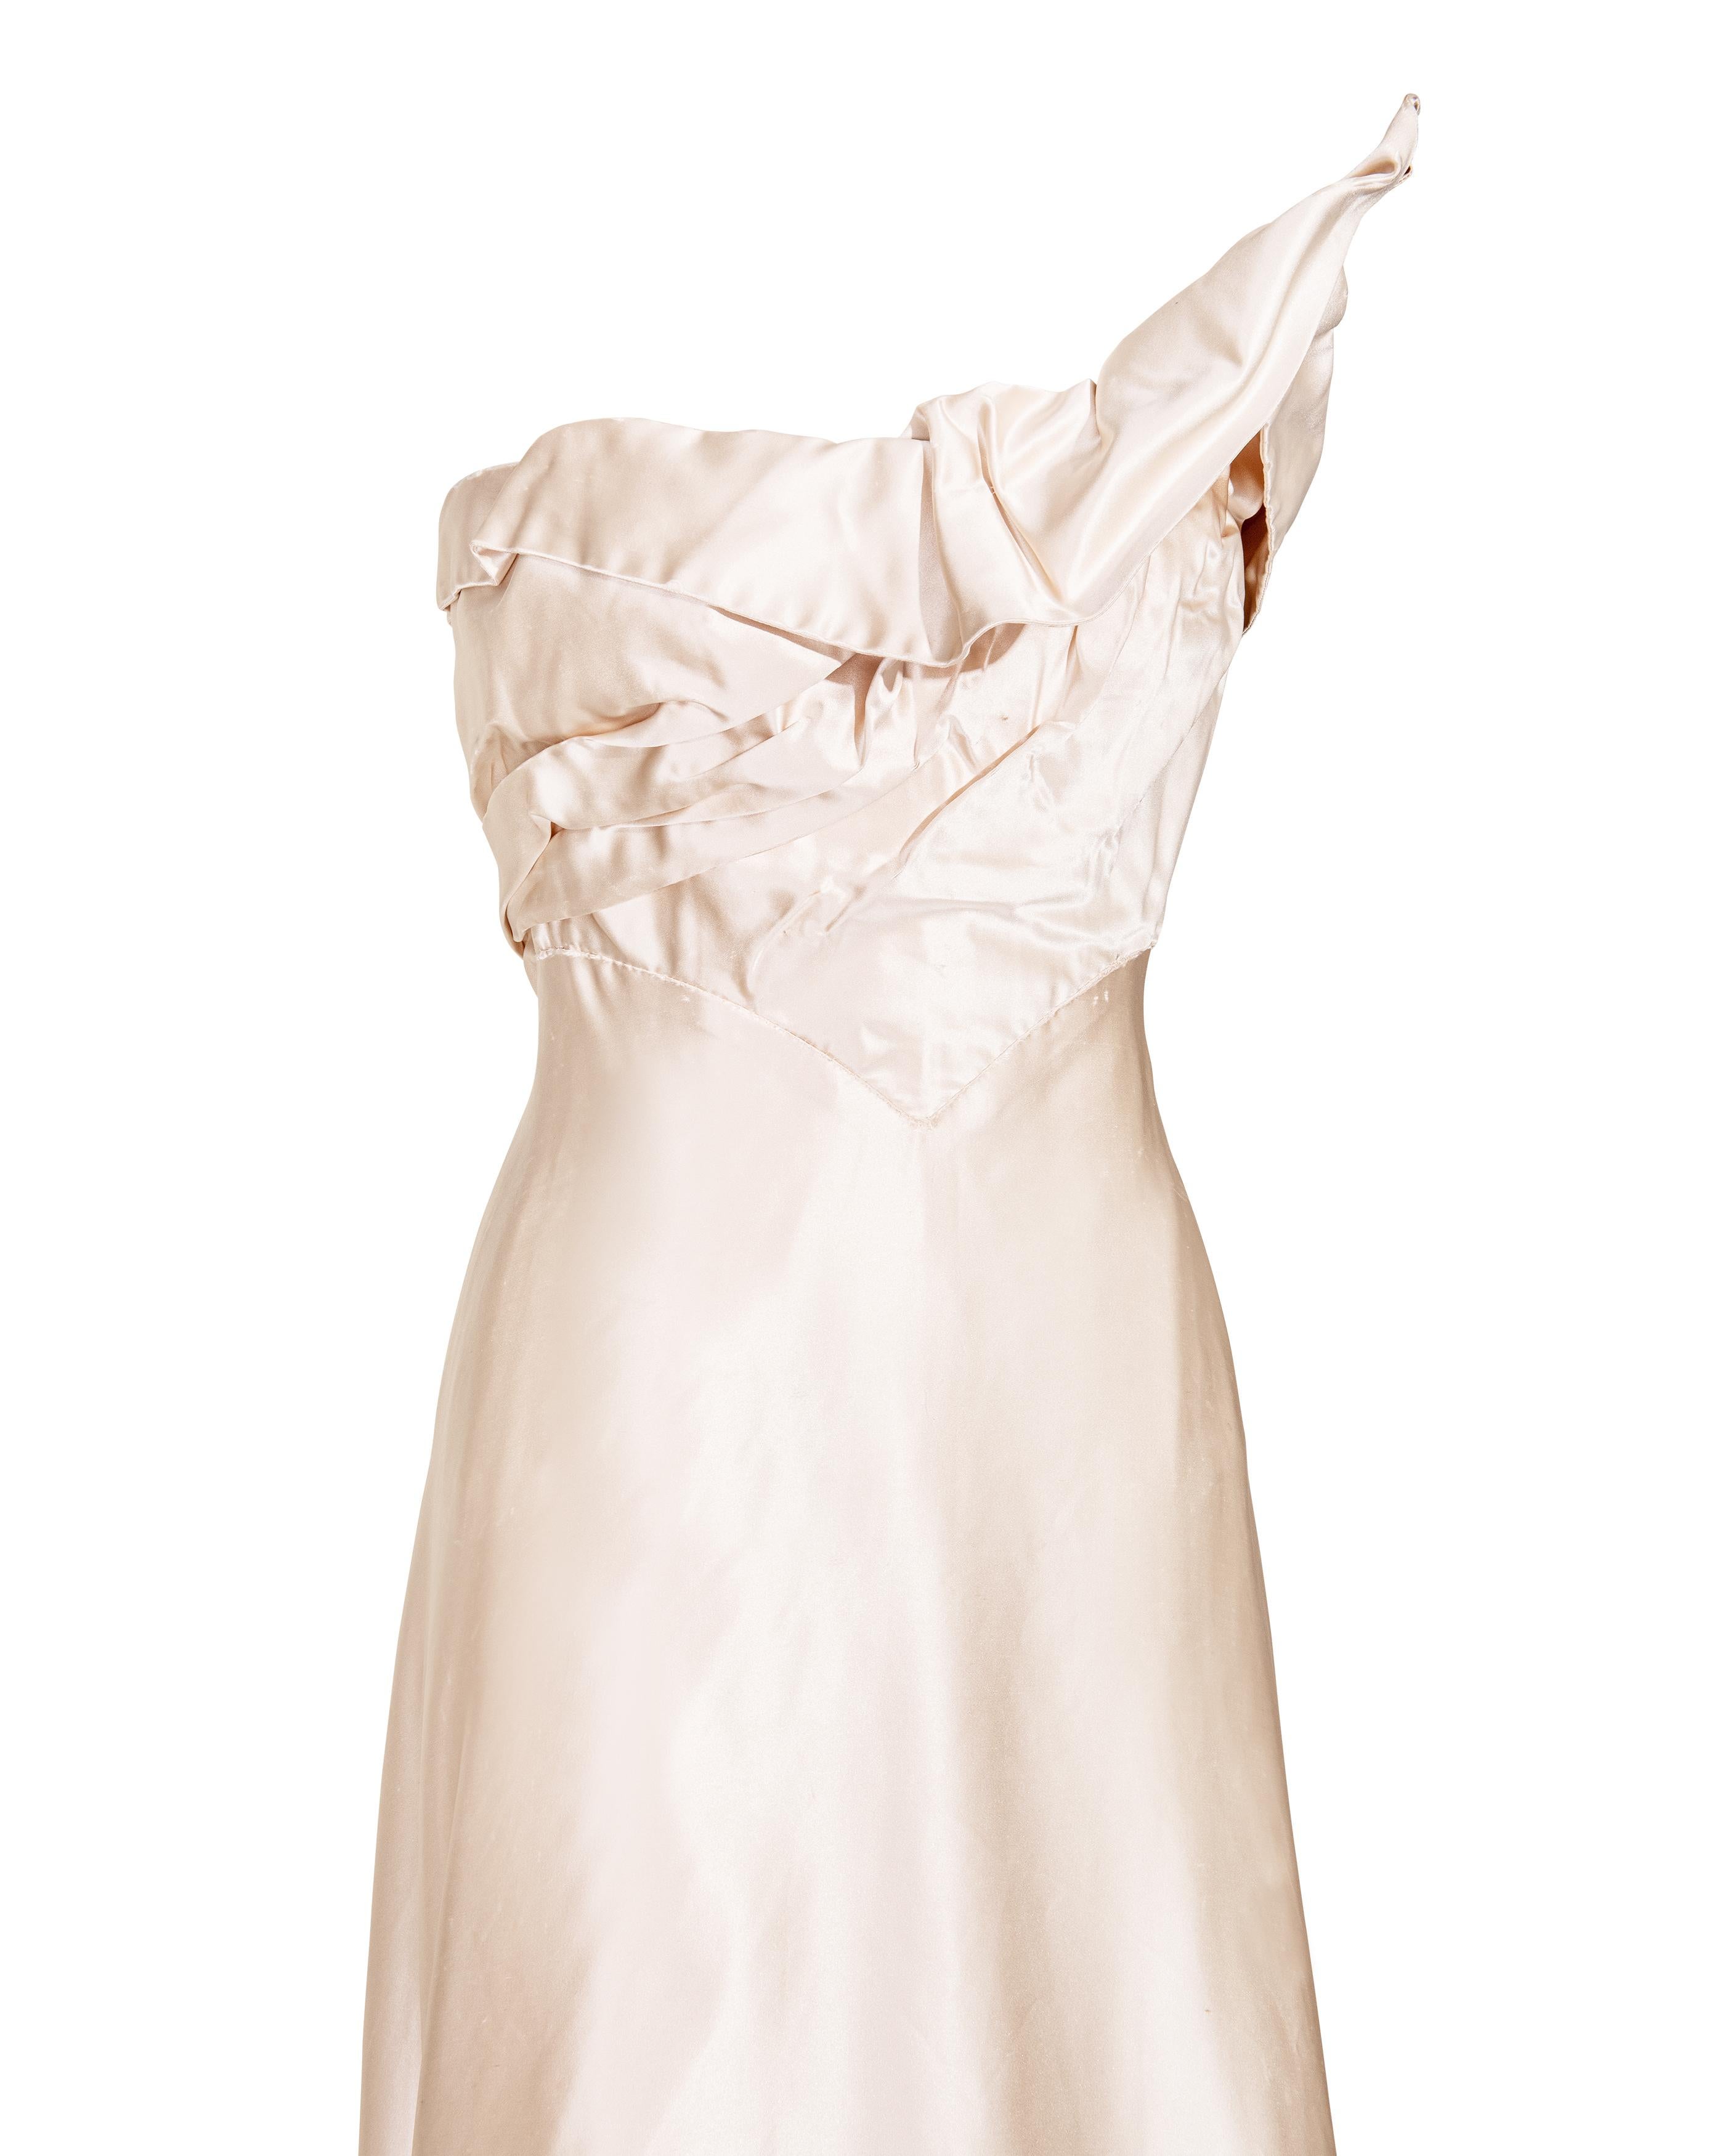 1940's Irene Lentz Haute Couture Strapless High-Low Cream Silk Gown For Sale 3